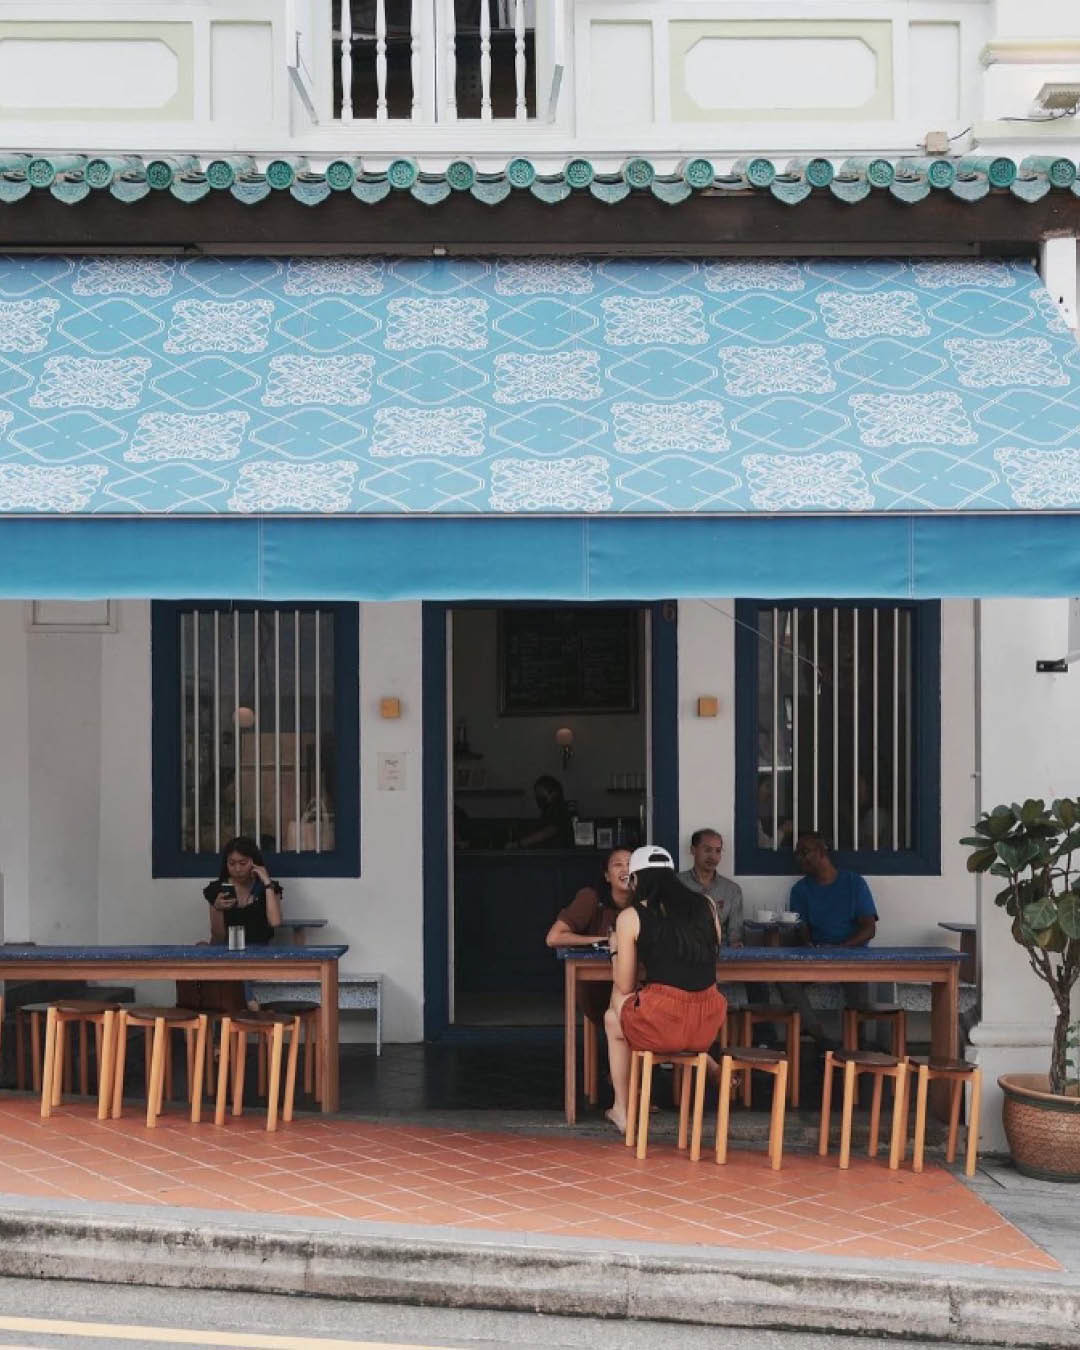 A street view of Maxi Coffee Bar, where two tables with stalls sit under a blue awning.